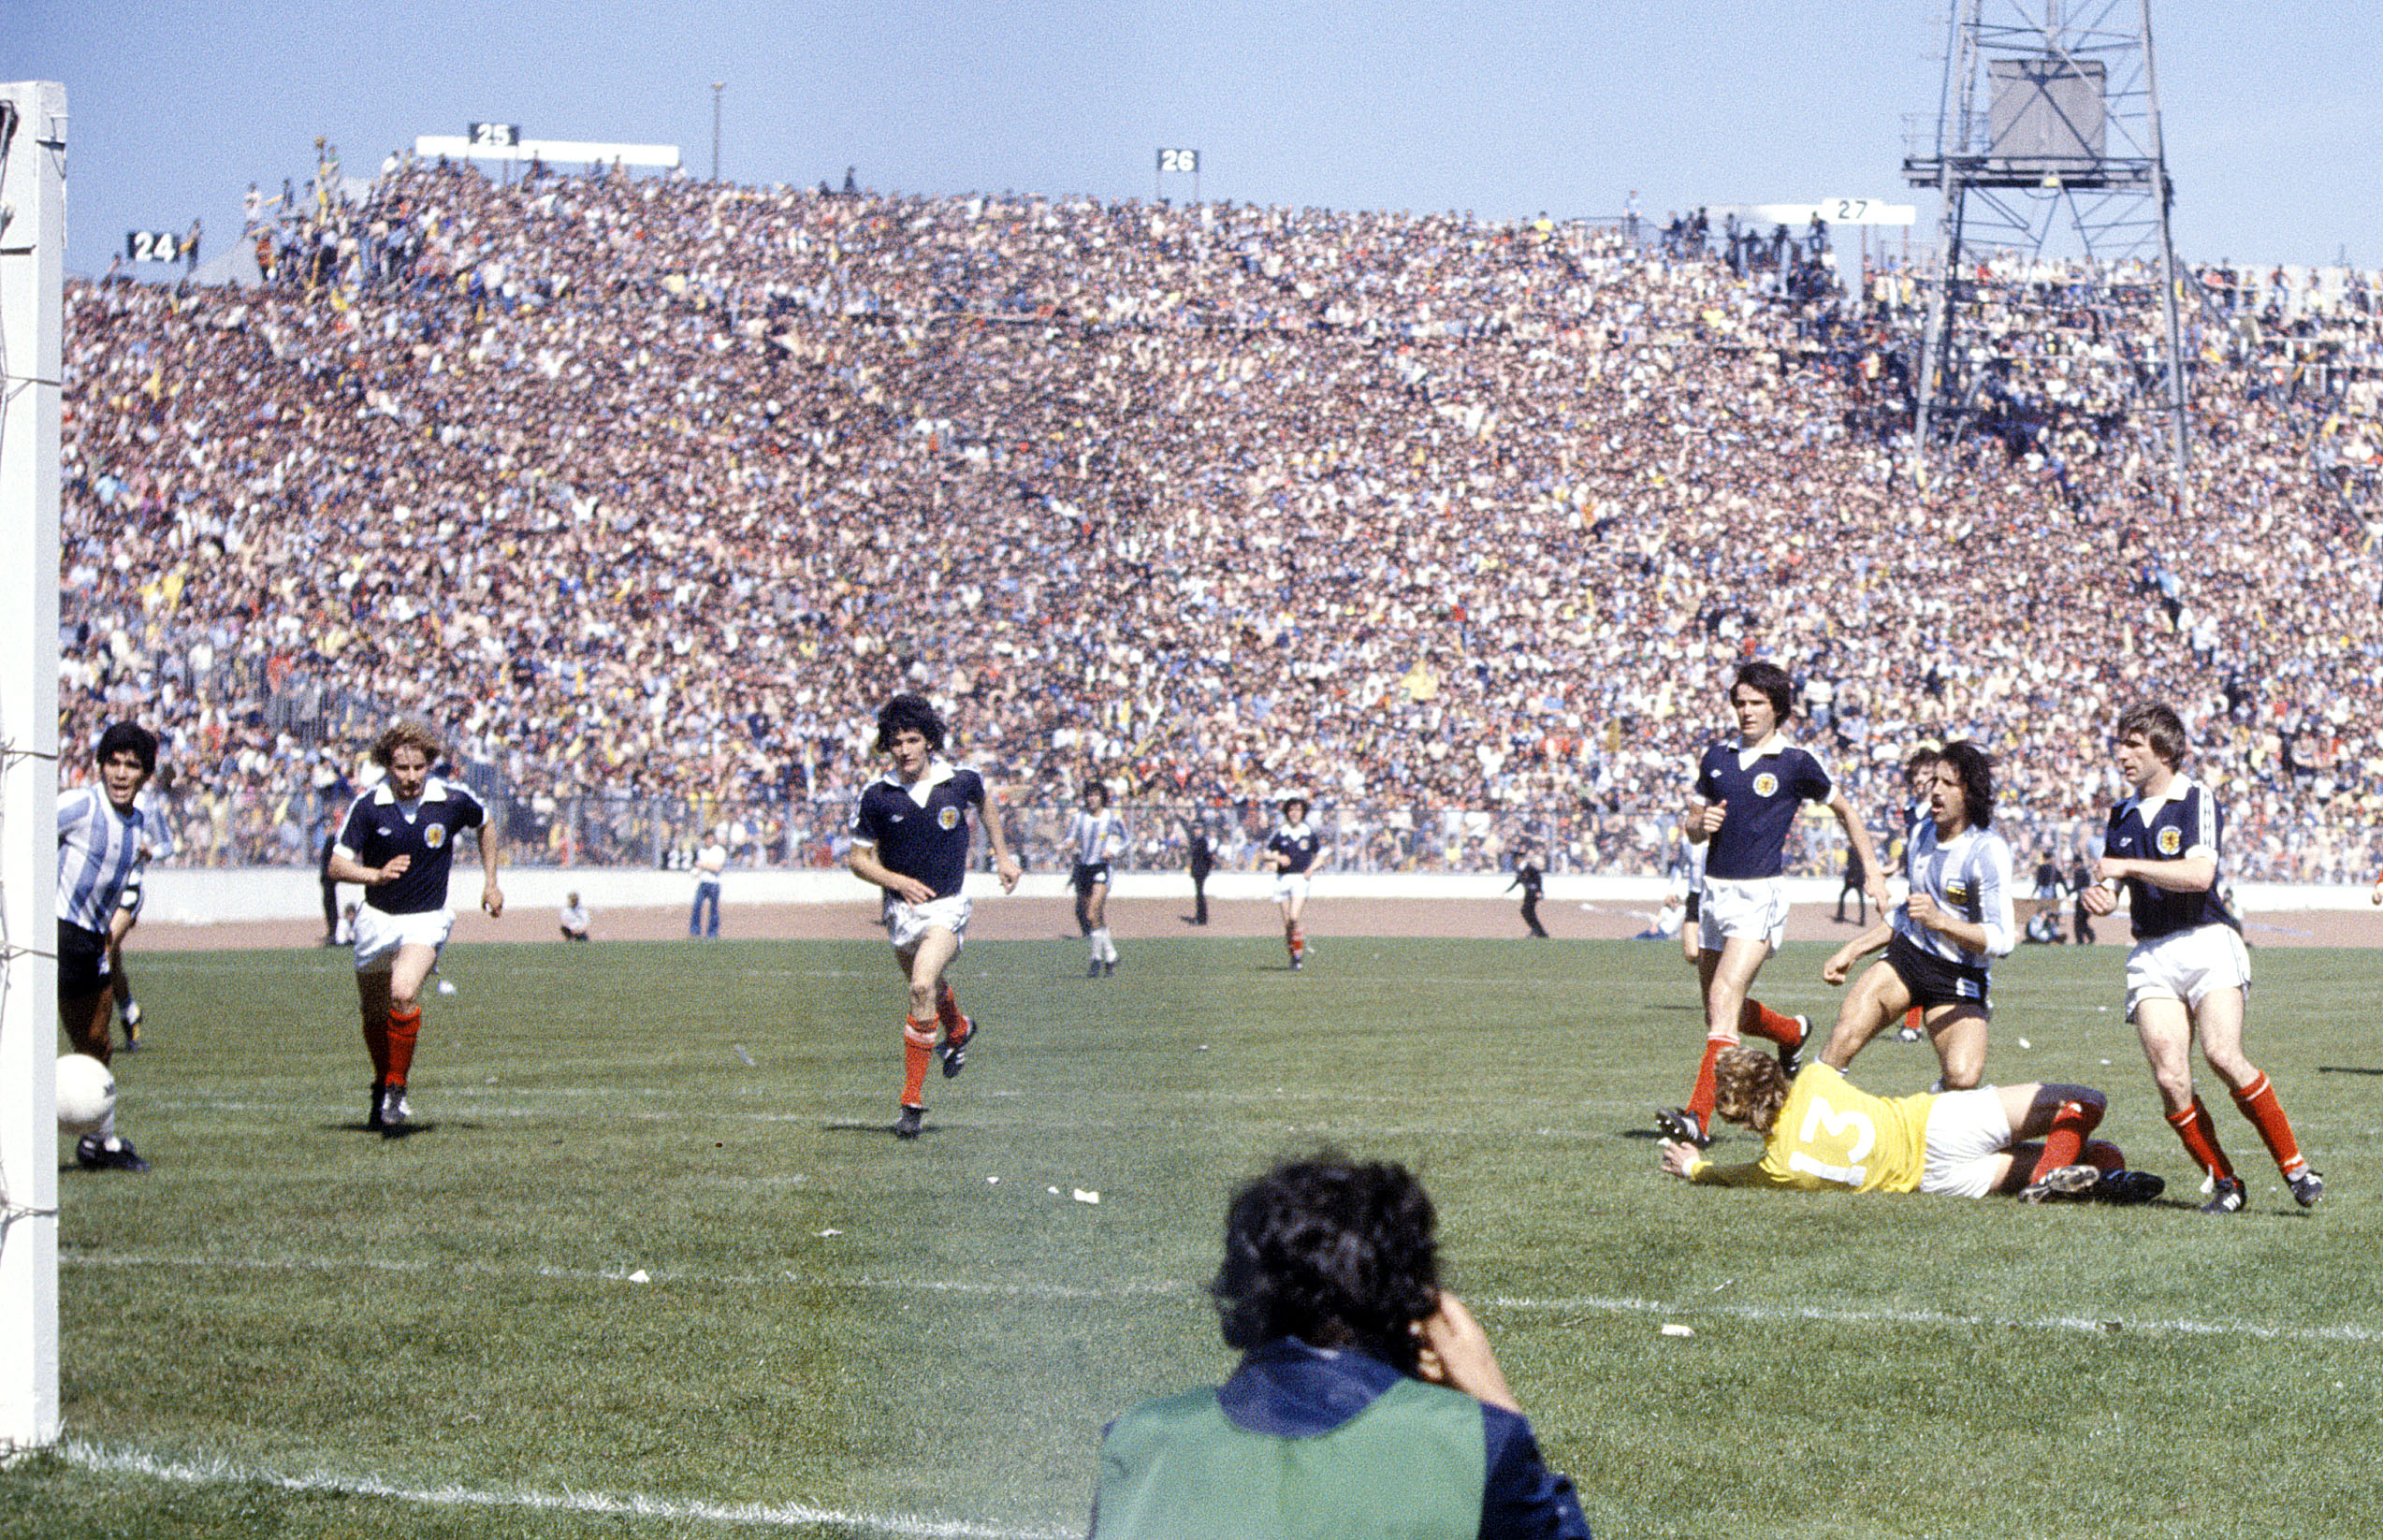 Hampden was packed as Maradona strutted his stuff, seen here on the left of the picture.